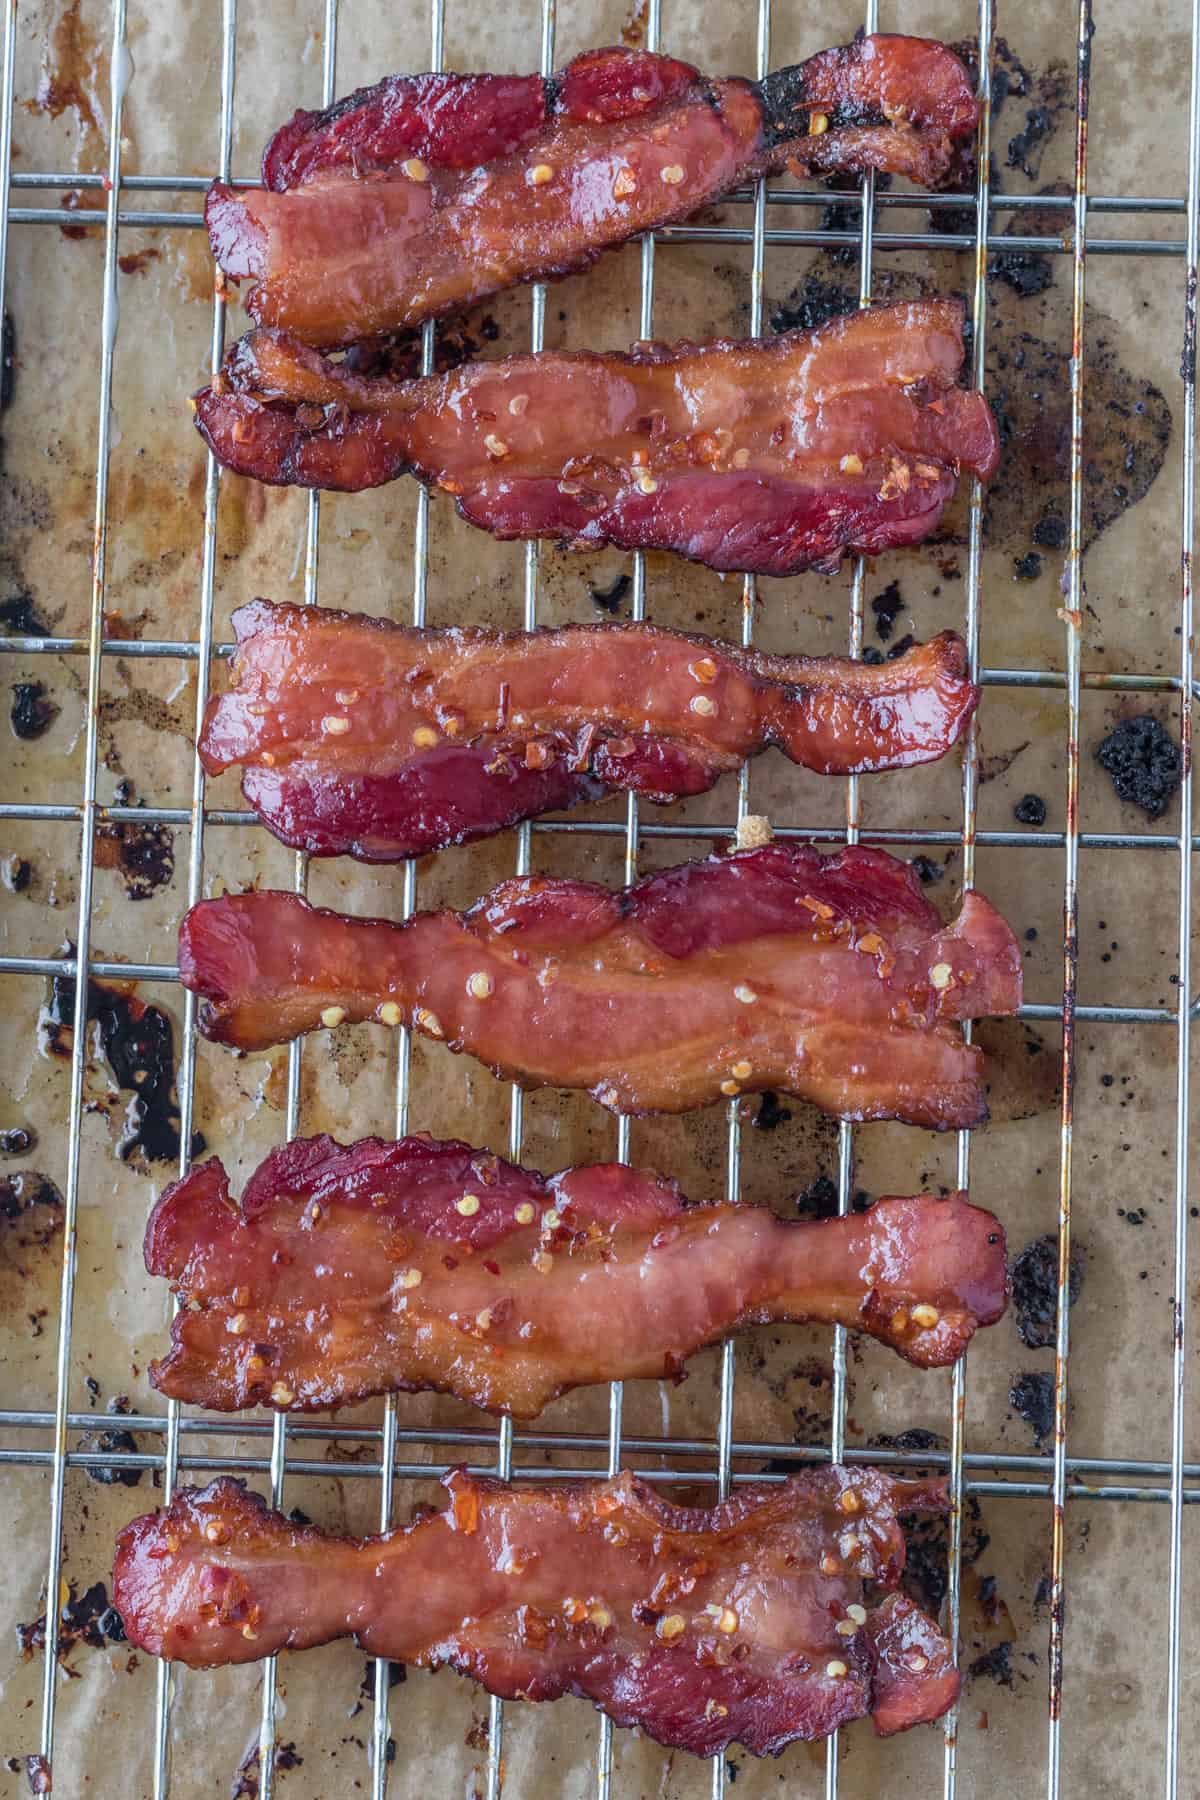 cooked bacon on the rack.